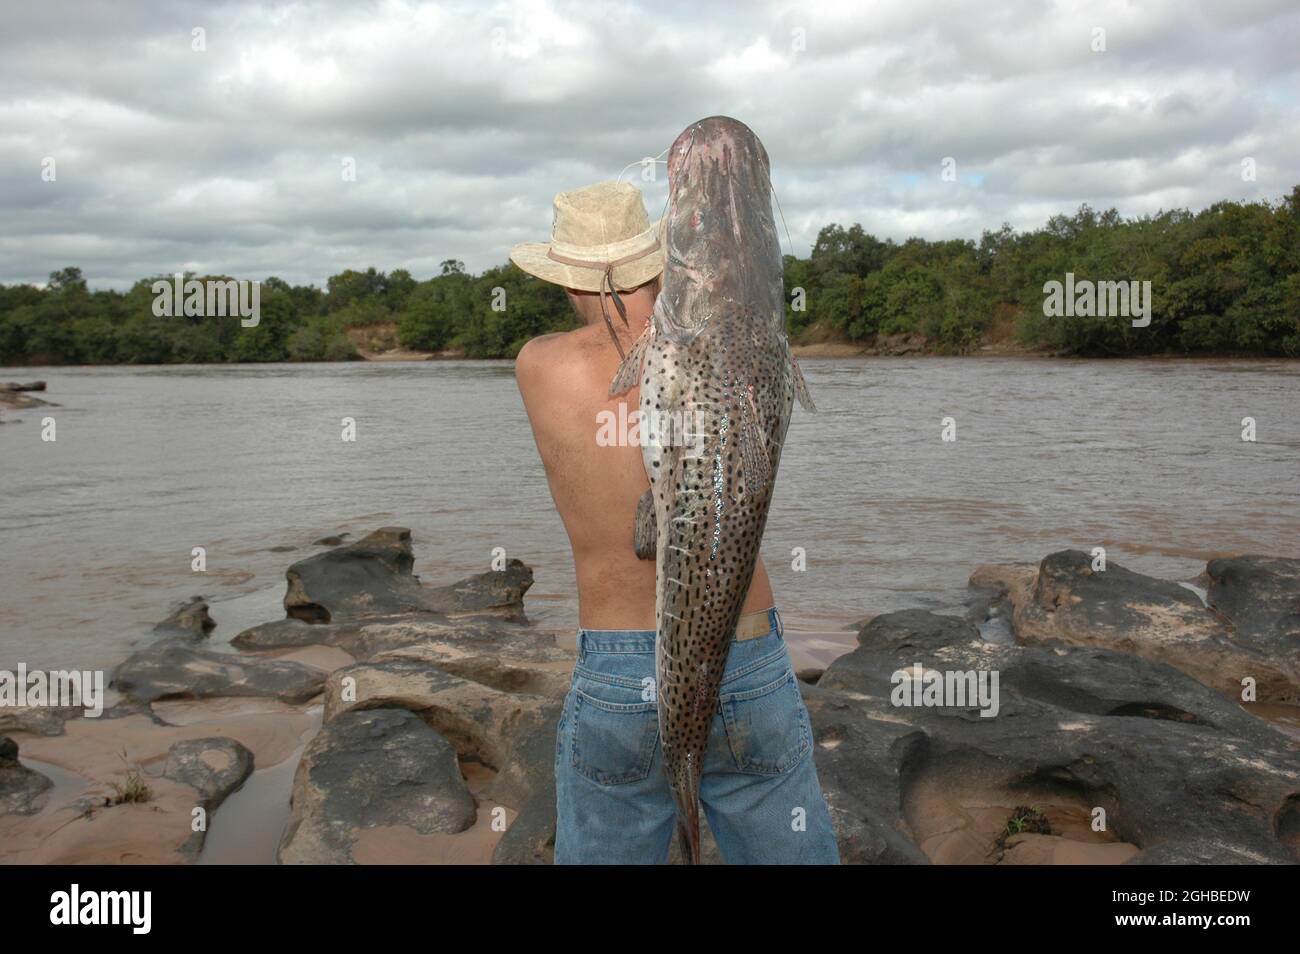 Fisherman carries a pintado ( Pseudoplatystoma corruscans, the Spotted sorubim - a species of long-whiskered catfish ). Stock Photo